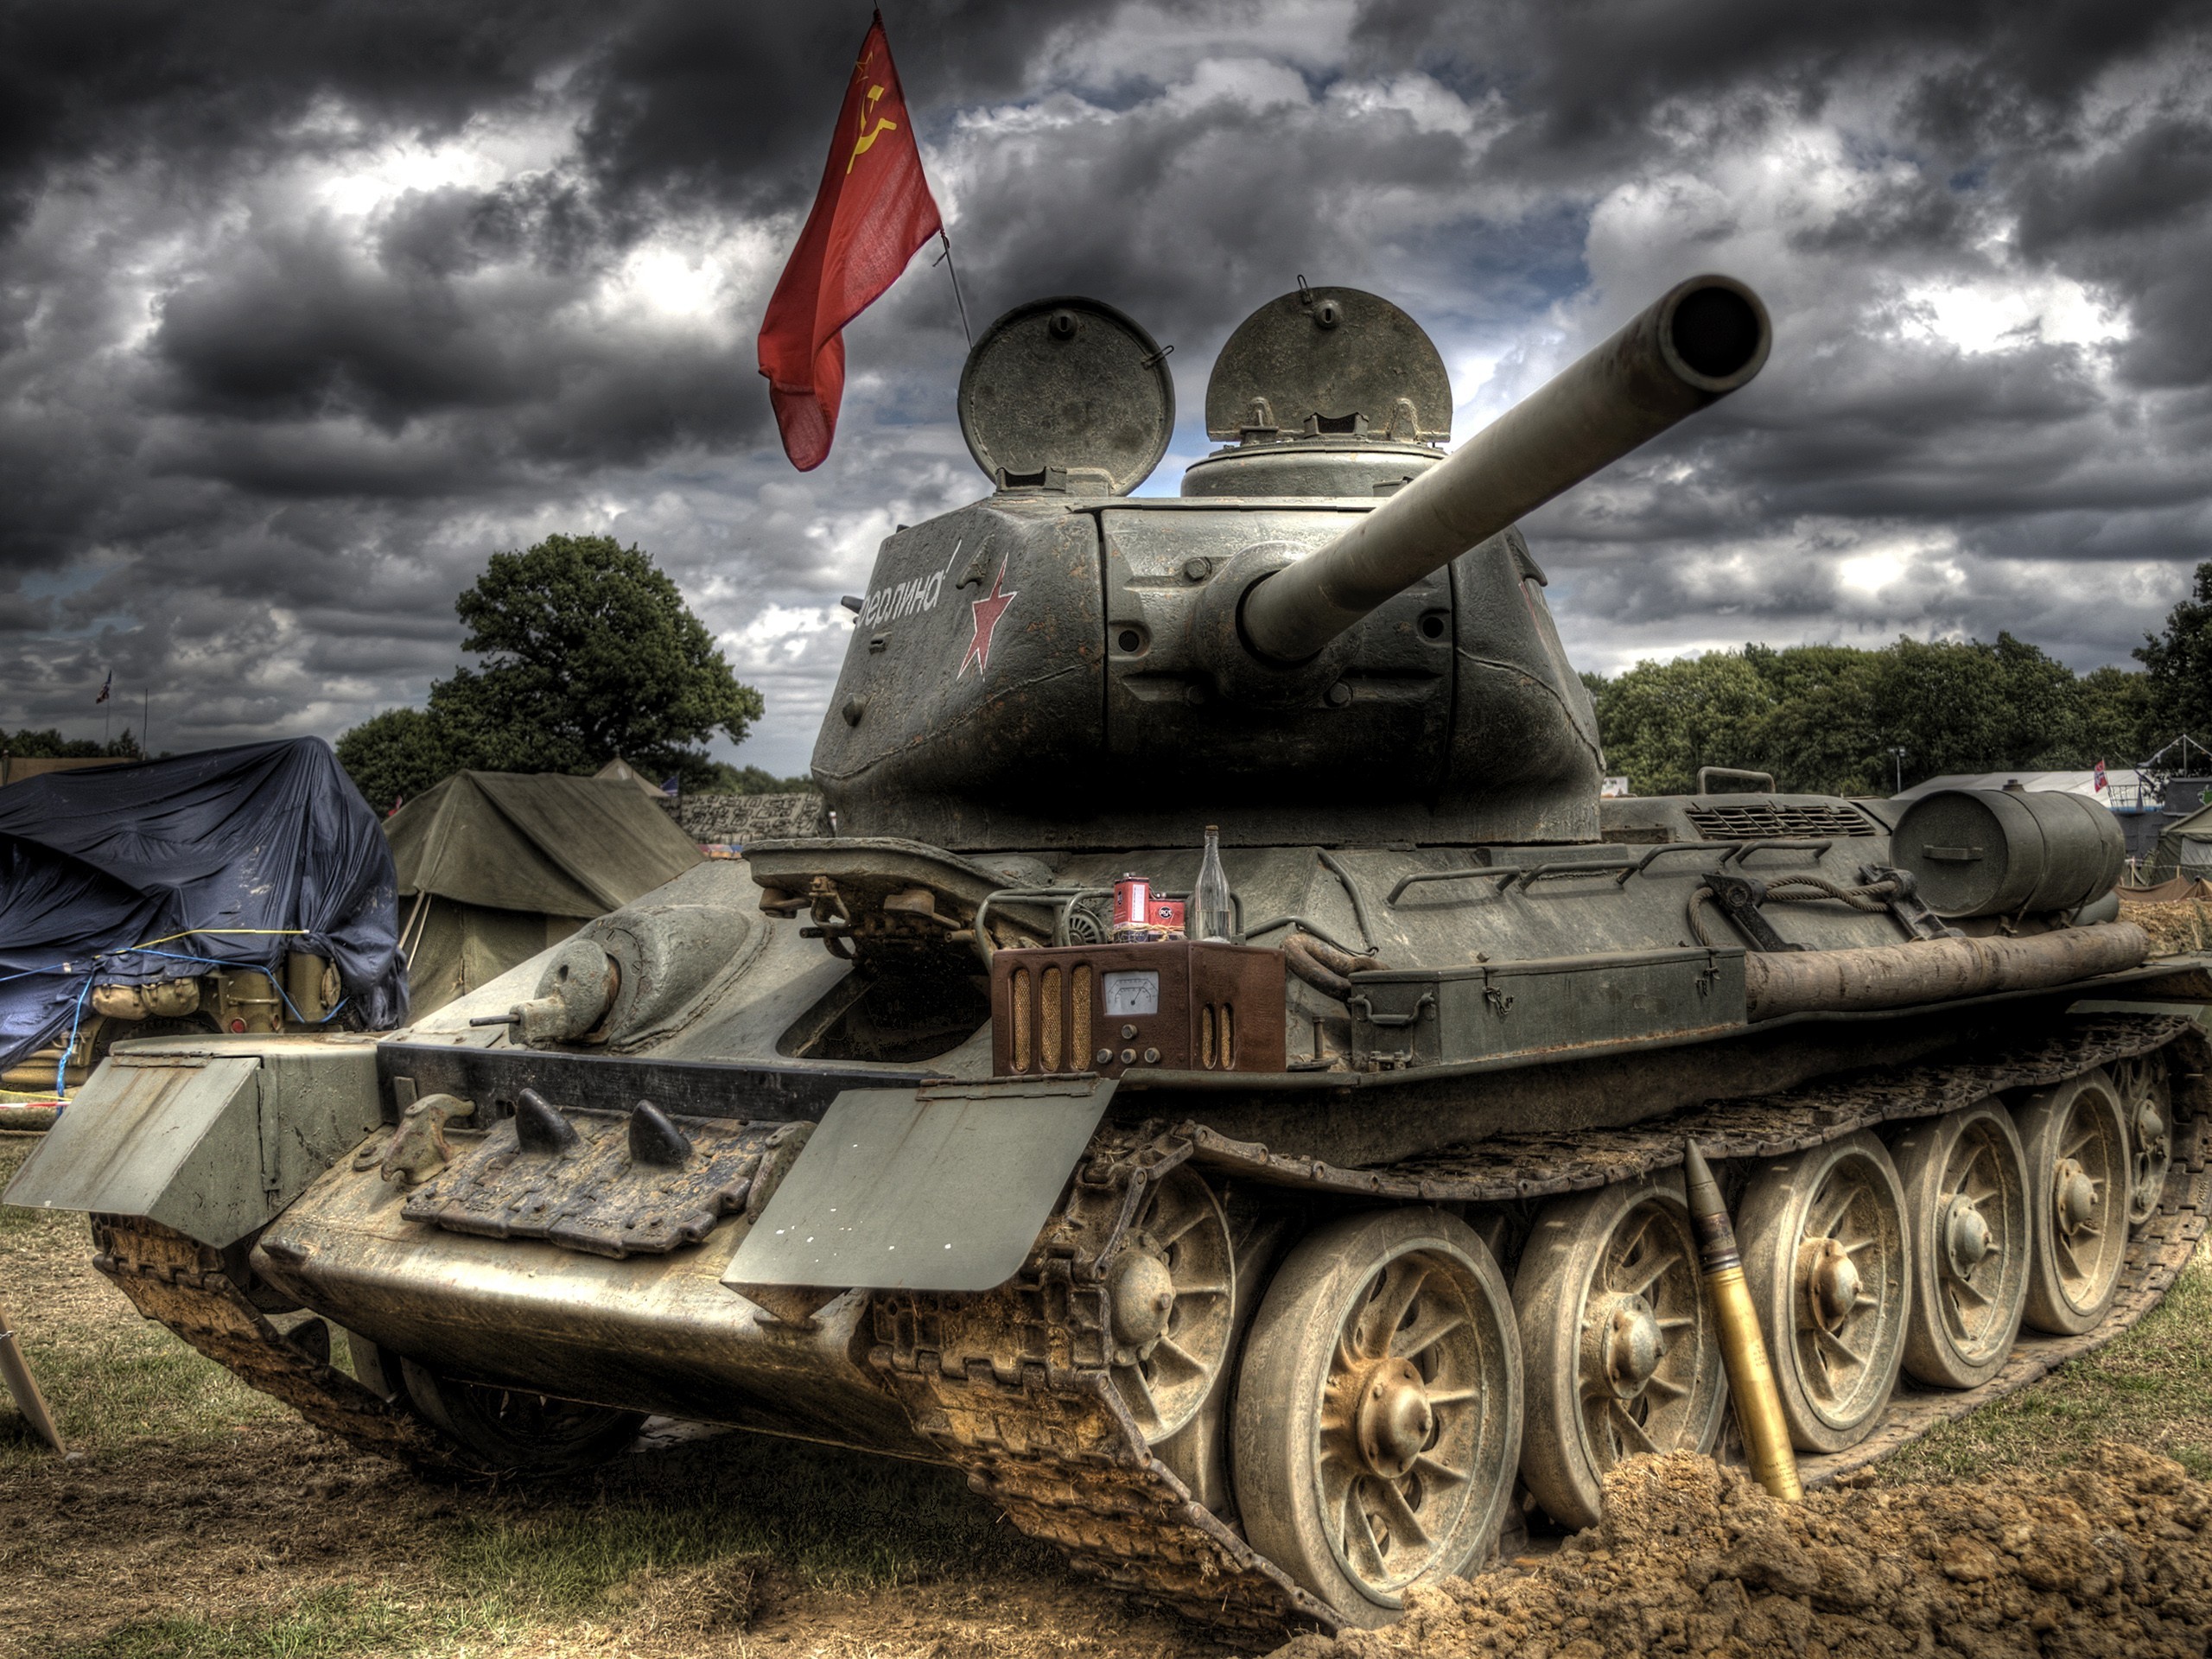 General 2560x1920 tank HDR military T-34 military vehicle vehicle flag USSR Soviet Army World War II